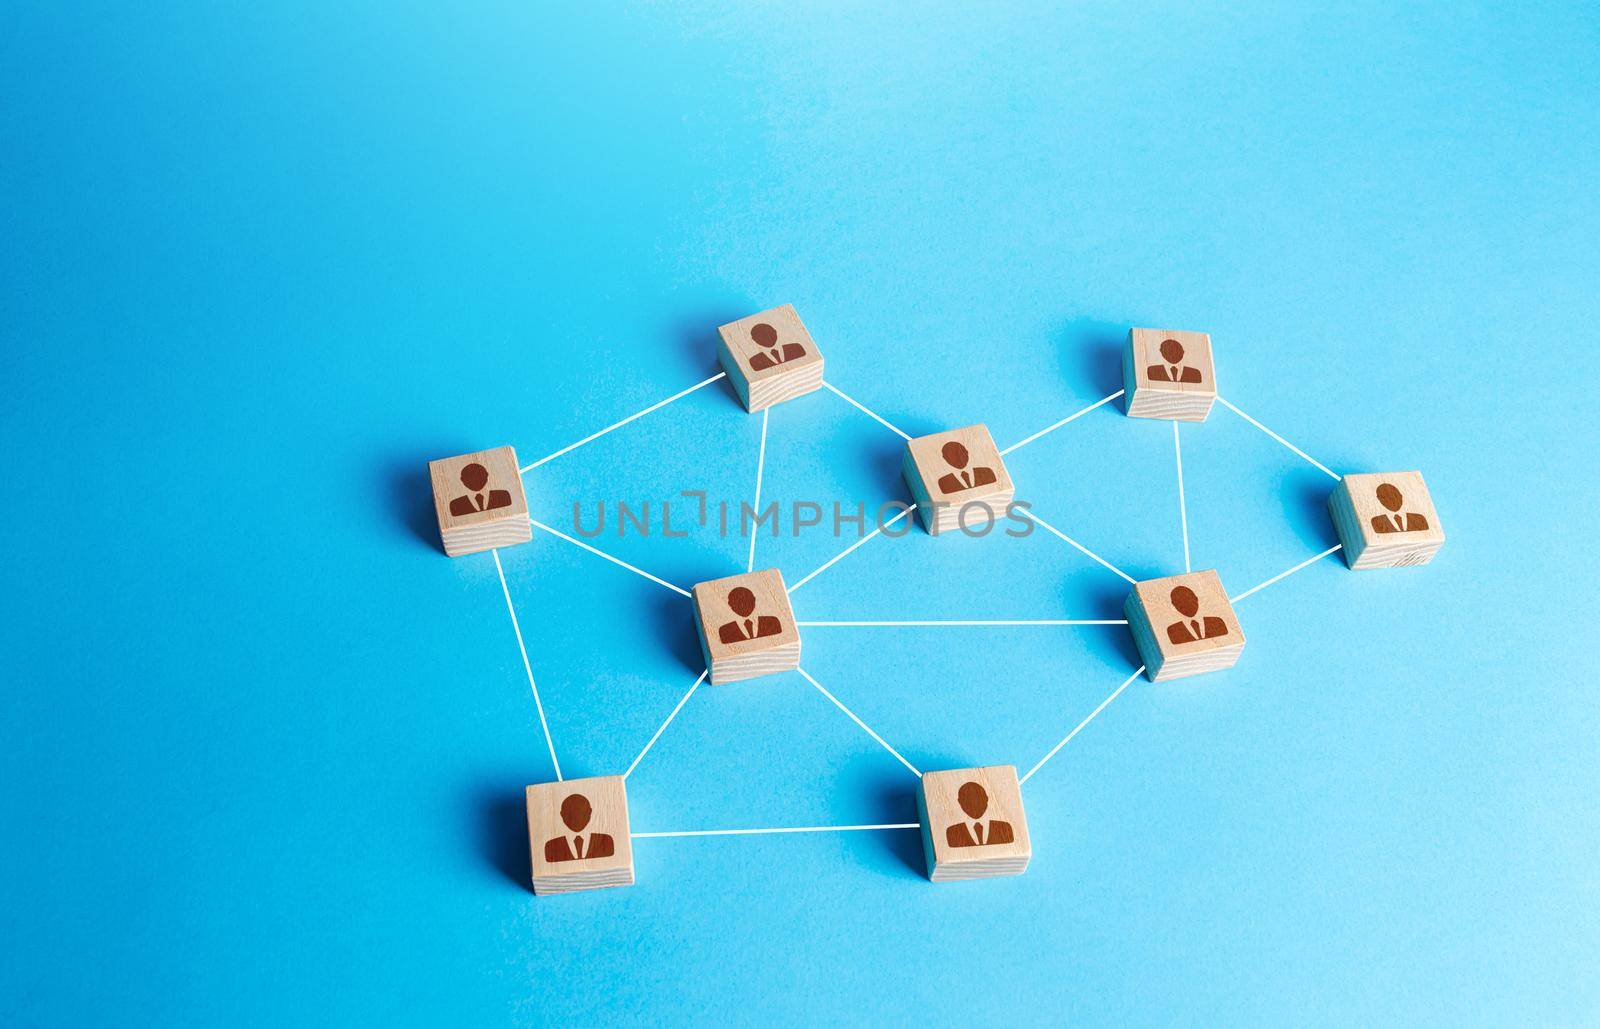 Network of connected staff blocks figurines by line. Unconventional company structure, distribution responsibilities between employees. High autonomy. Atypical hierarchical business system.